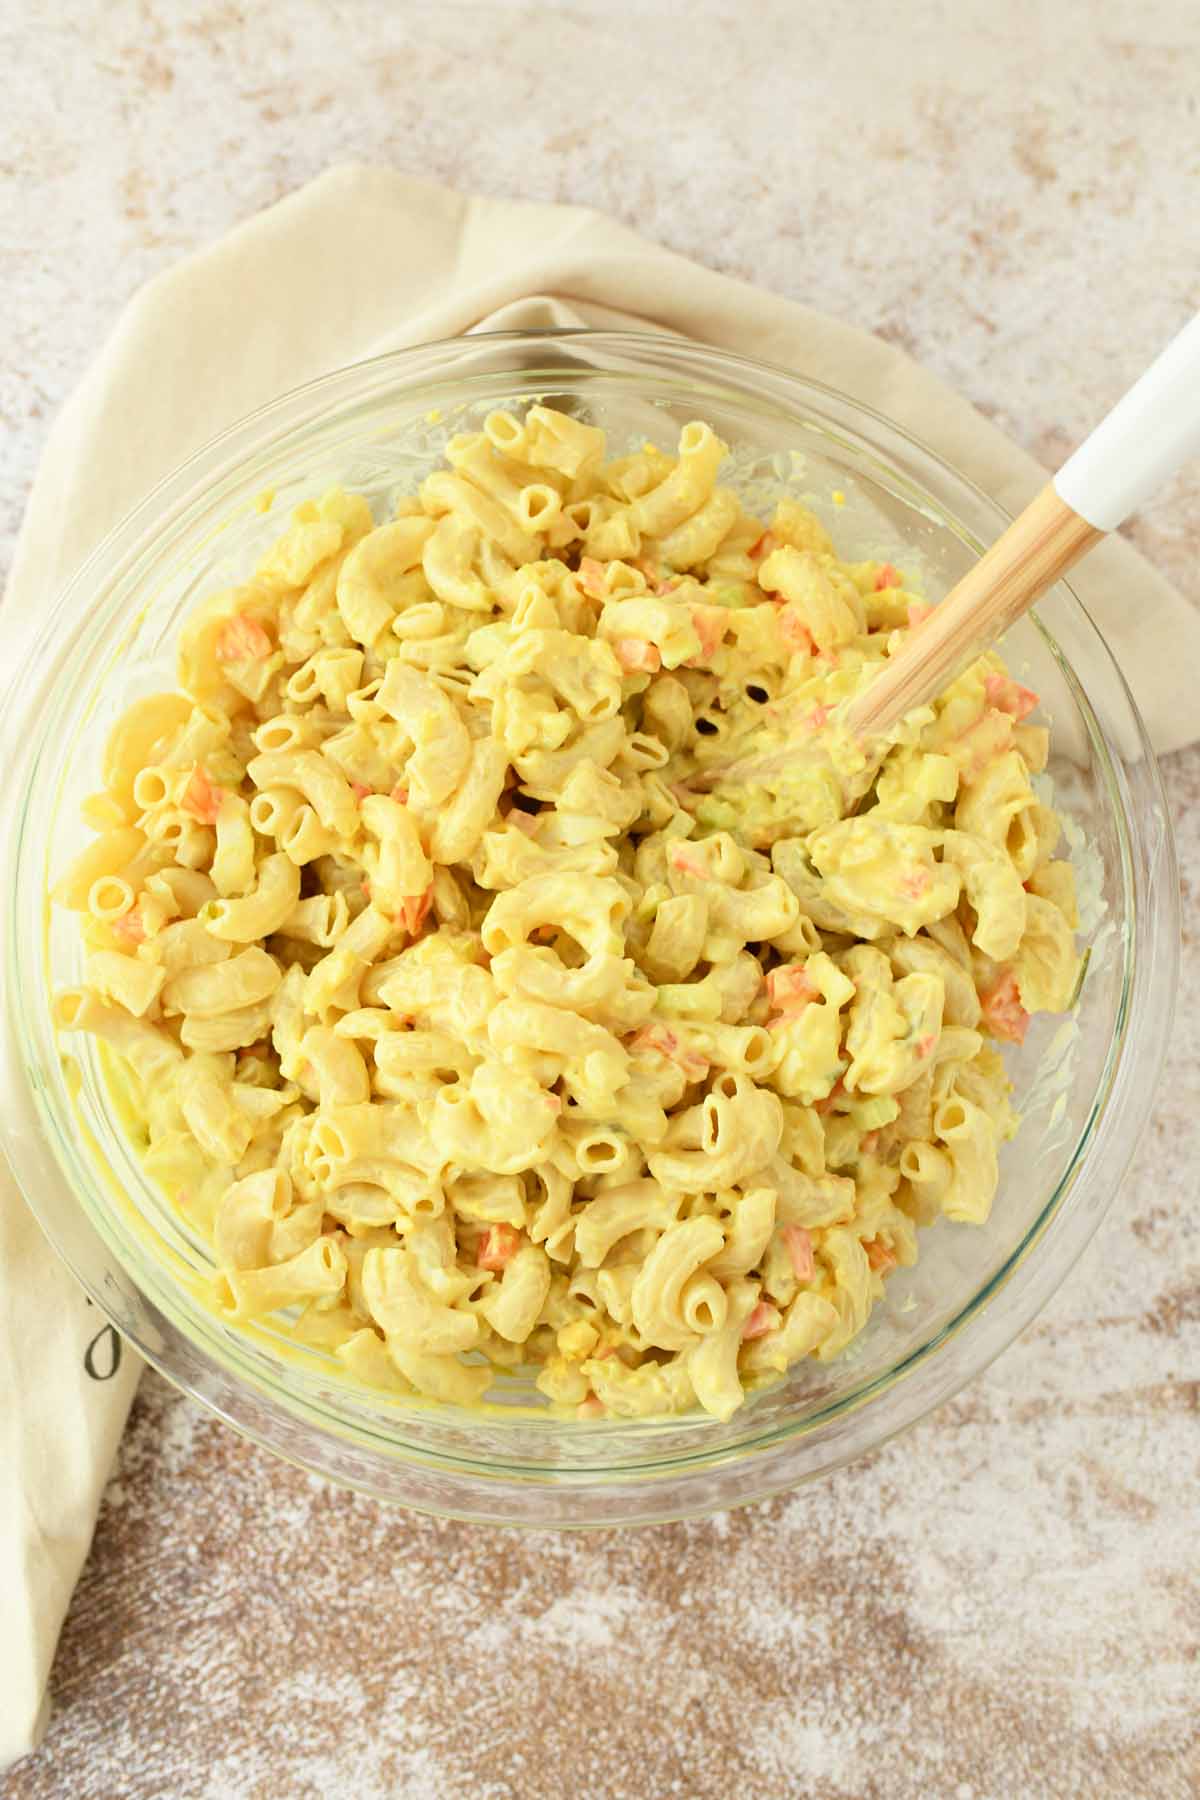 Amish Macaroni Salad in a clear, glass bowl with a wooden spoon.